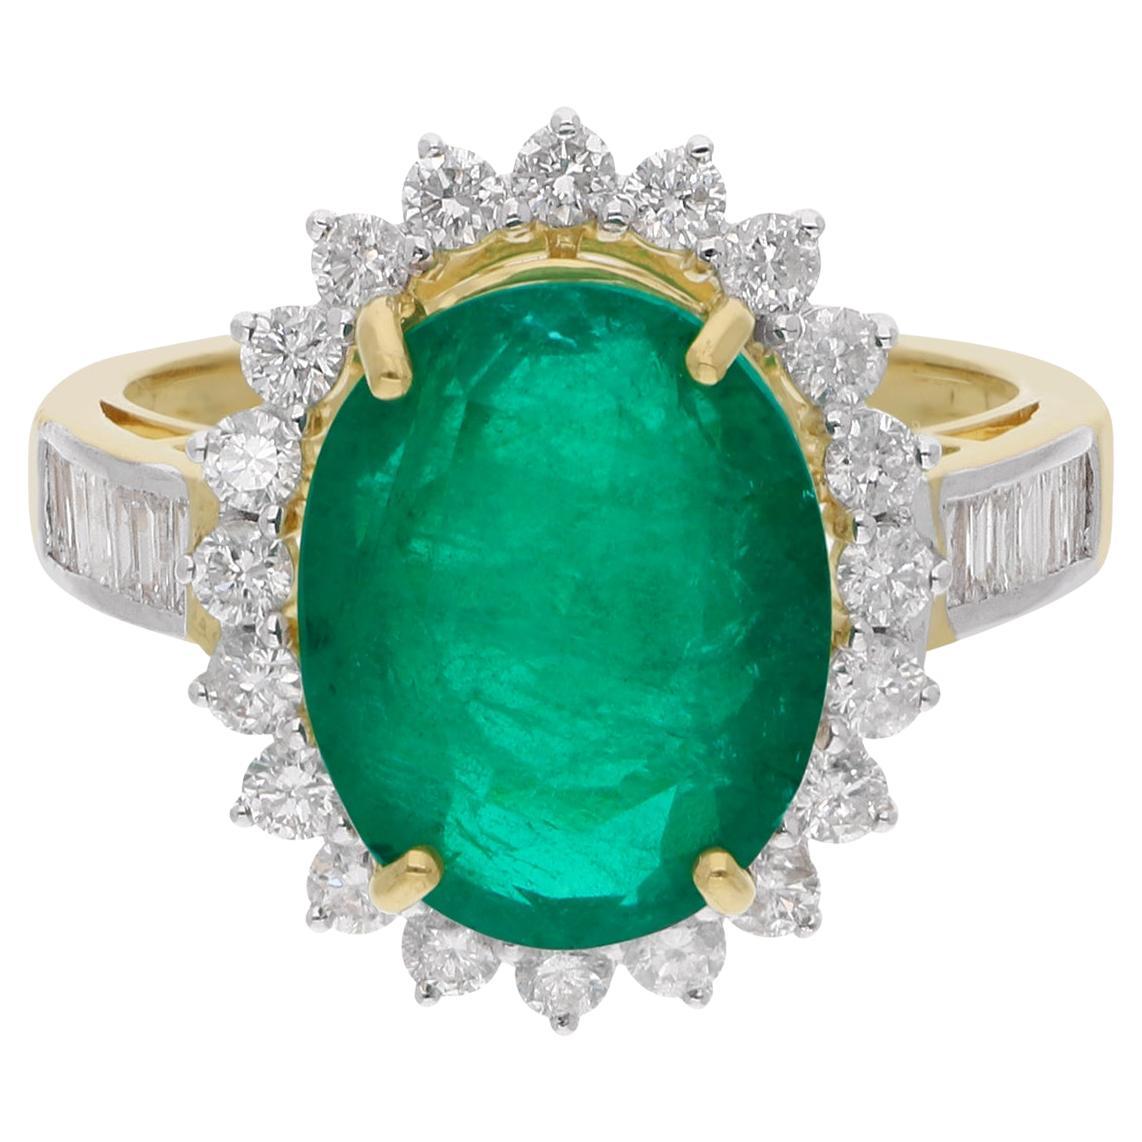 For Sale:  Real Oval Zambian Emerald Gemstone Cocktail Ring Diamond 18k Yellow Gold Jewelry